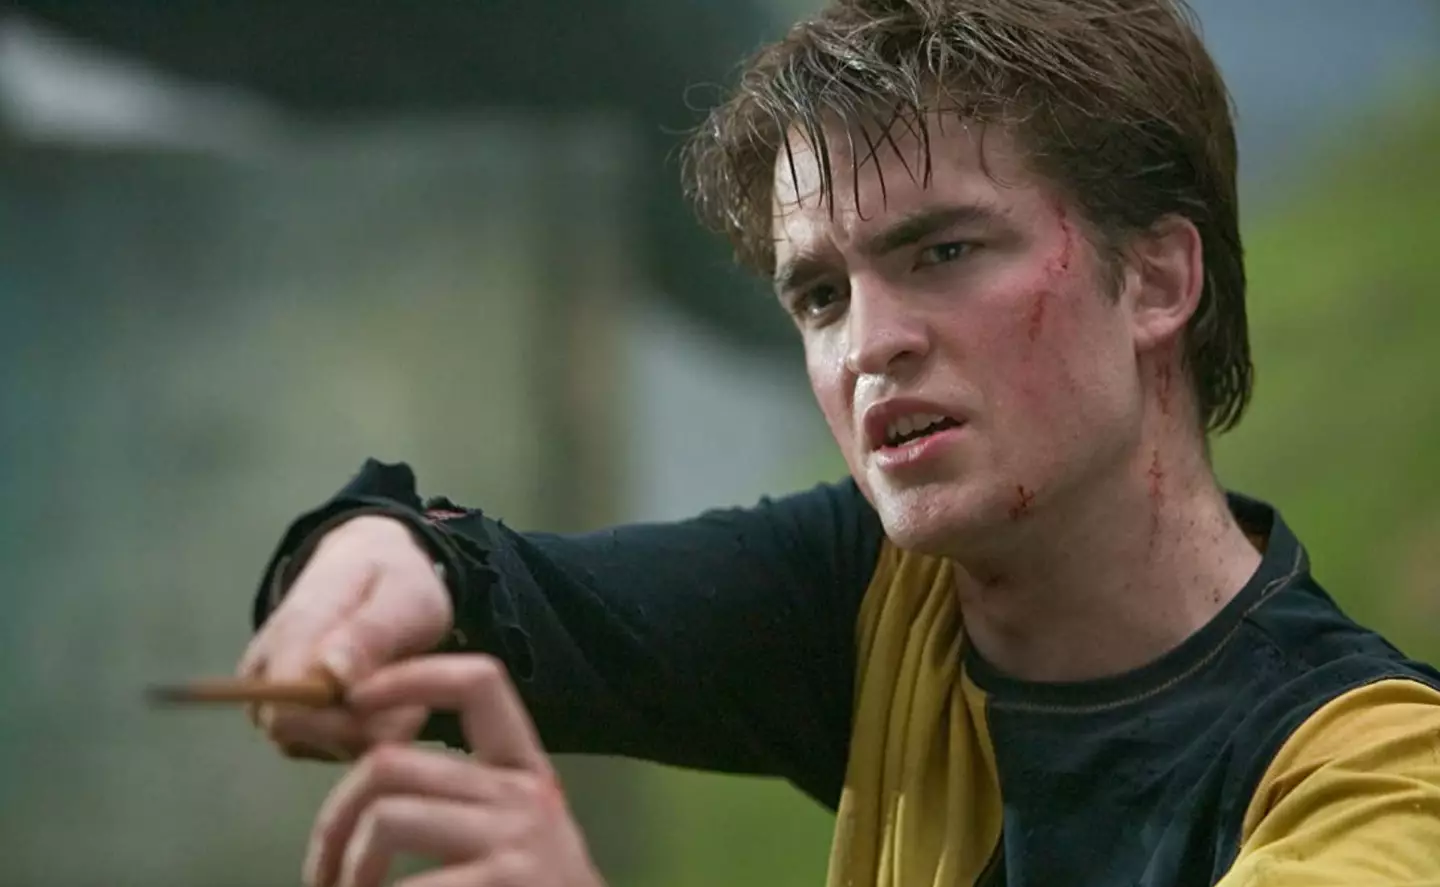 Cedric is most widely recognised as being played by Robert Pattinson however another actor took on the role in the franchise too.